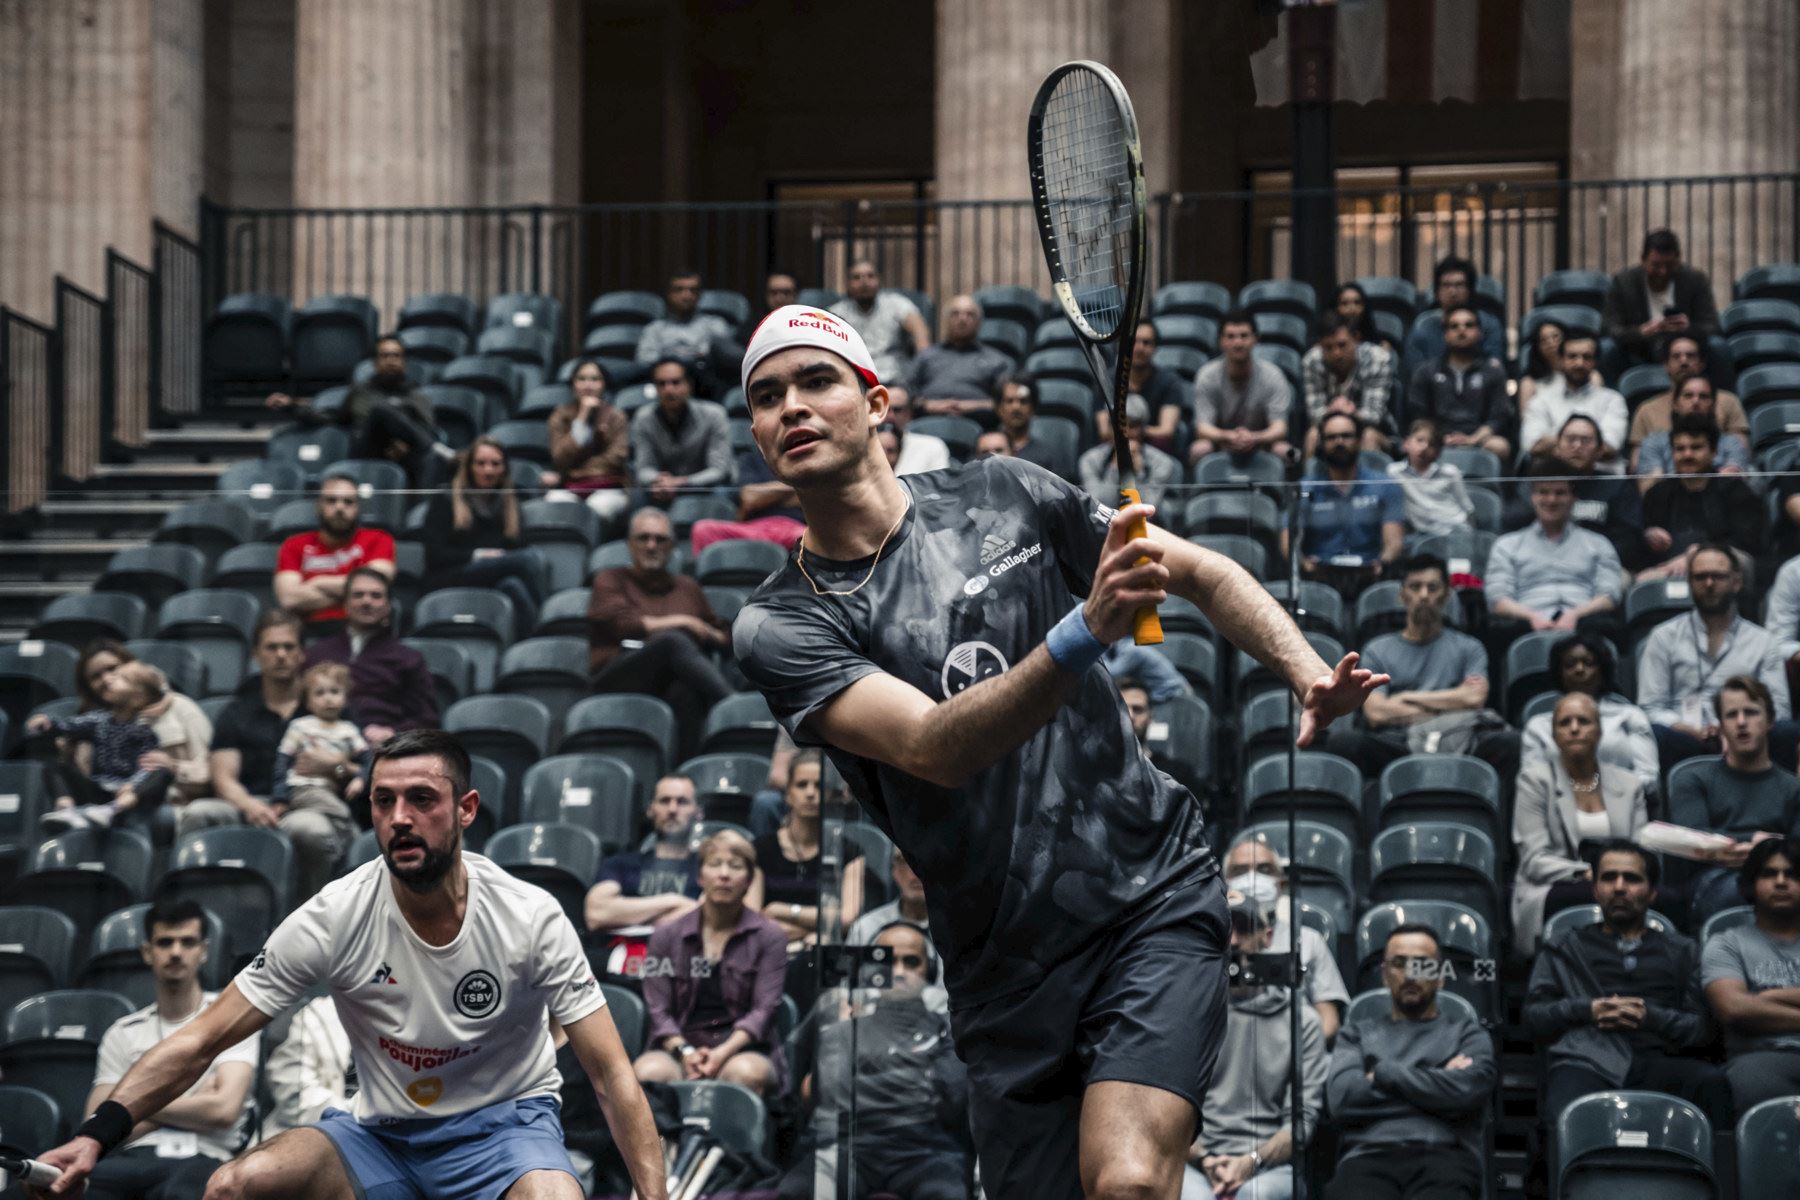 Diego Elias, on top!  : the new King of Squash is revolutionizing the sport |  information